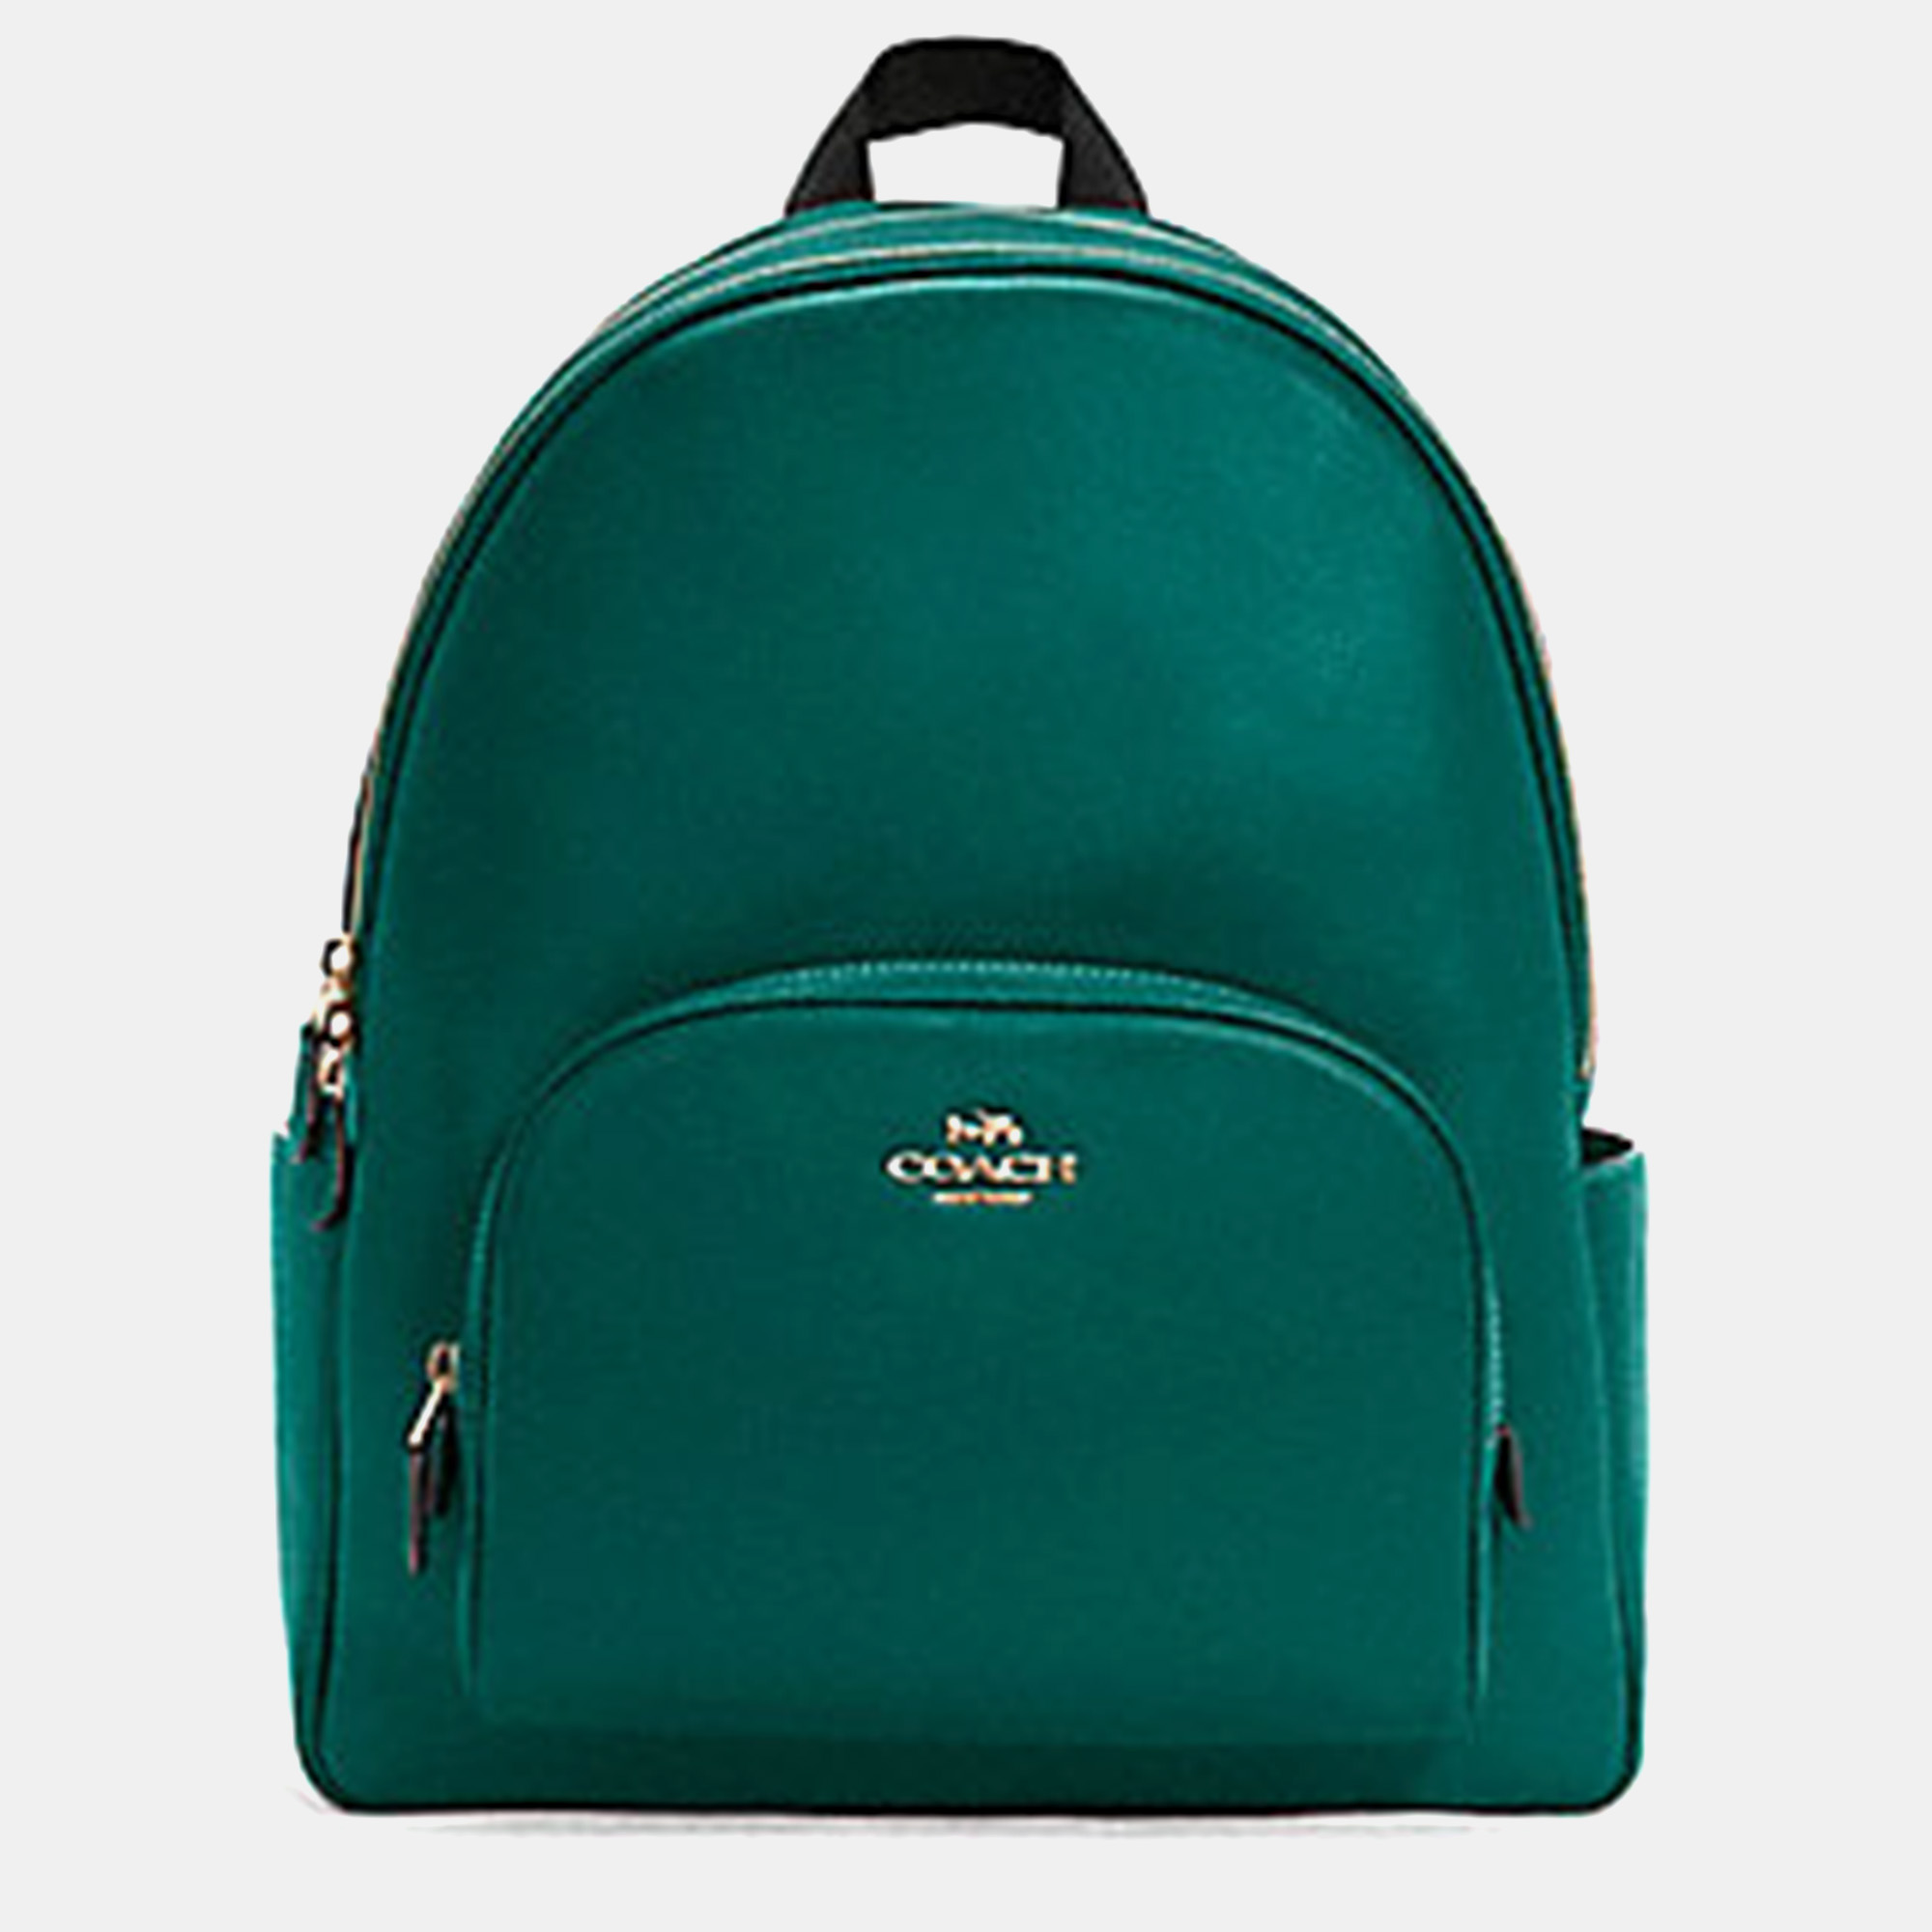 Coach Green Leather Backpack